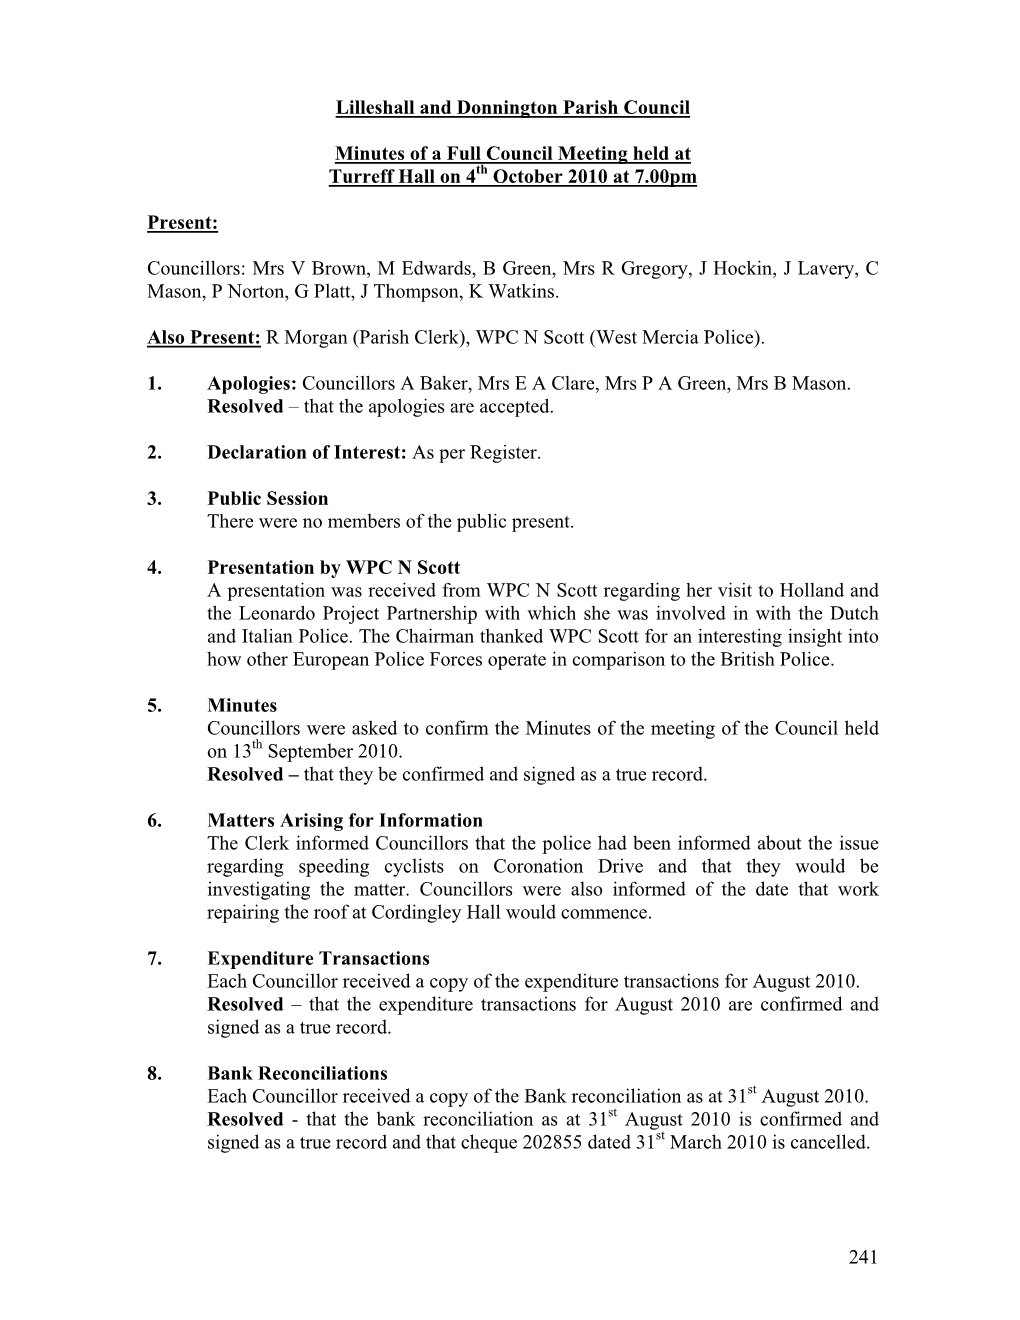 Lilleshall and Donnington Parish Council Minutes of a Full Council